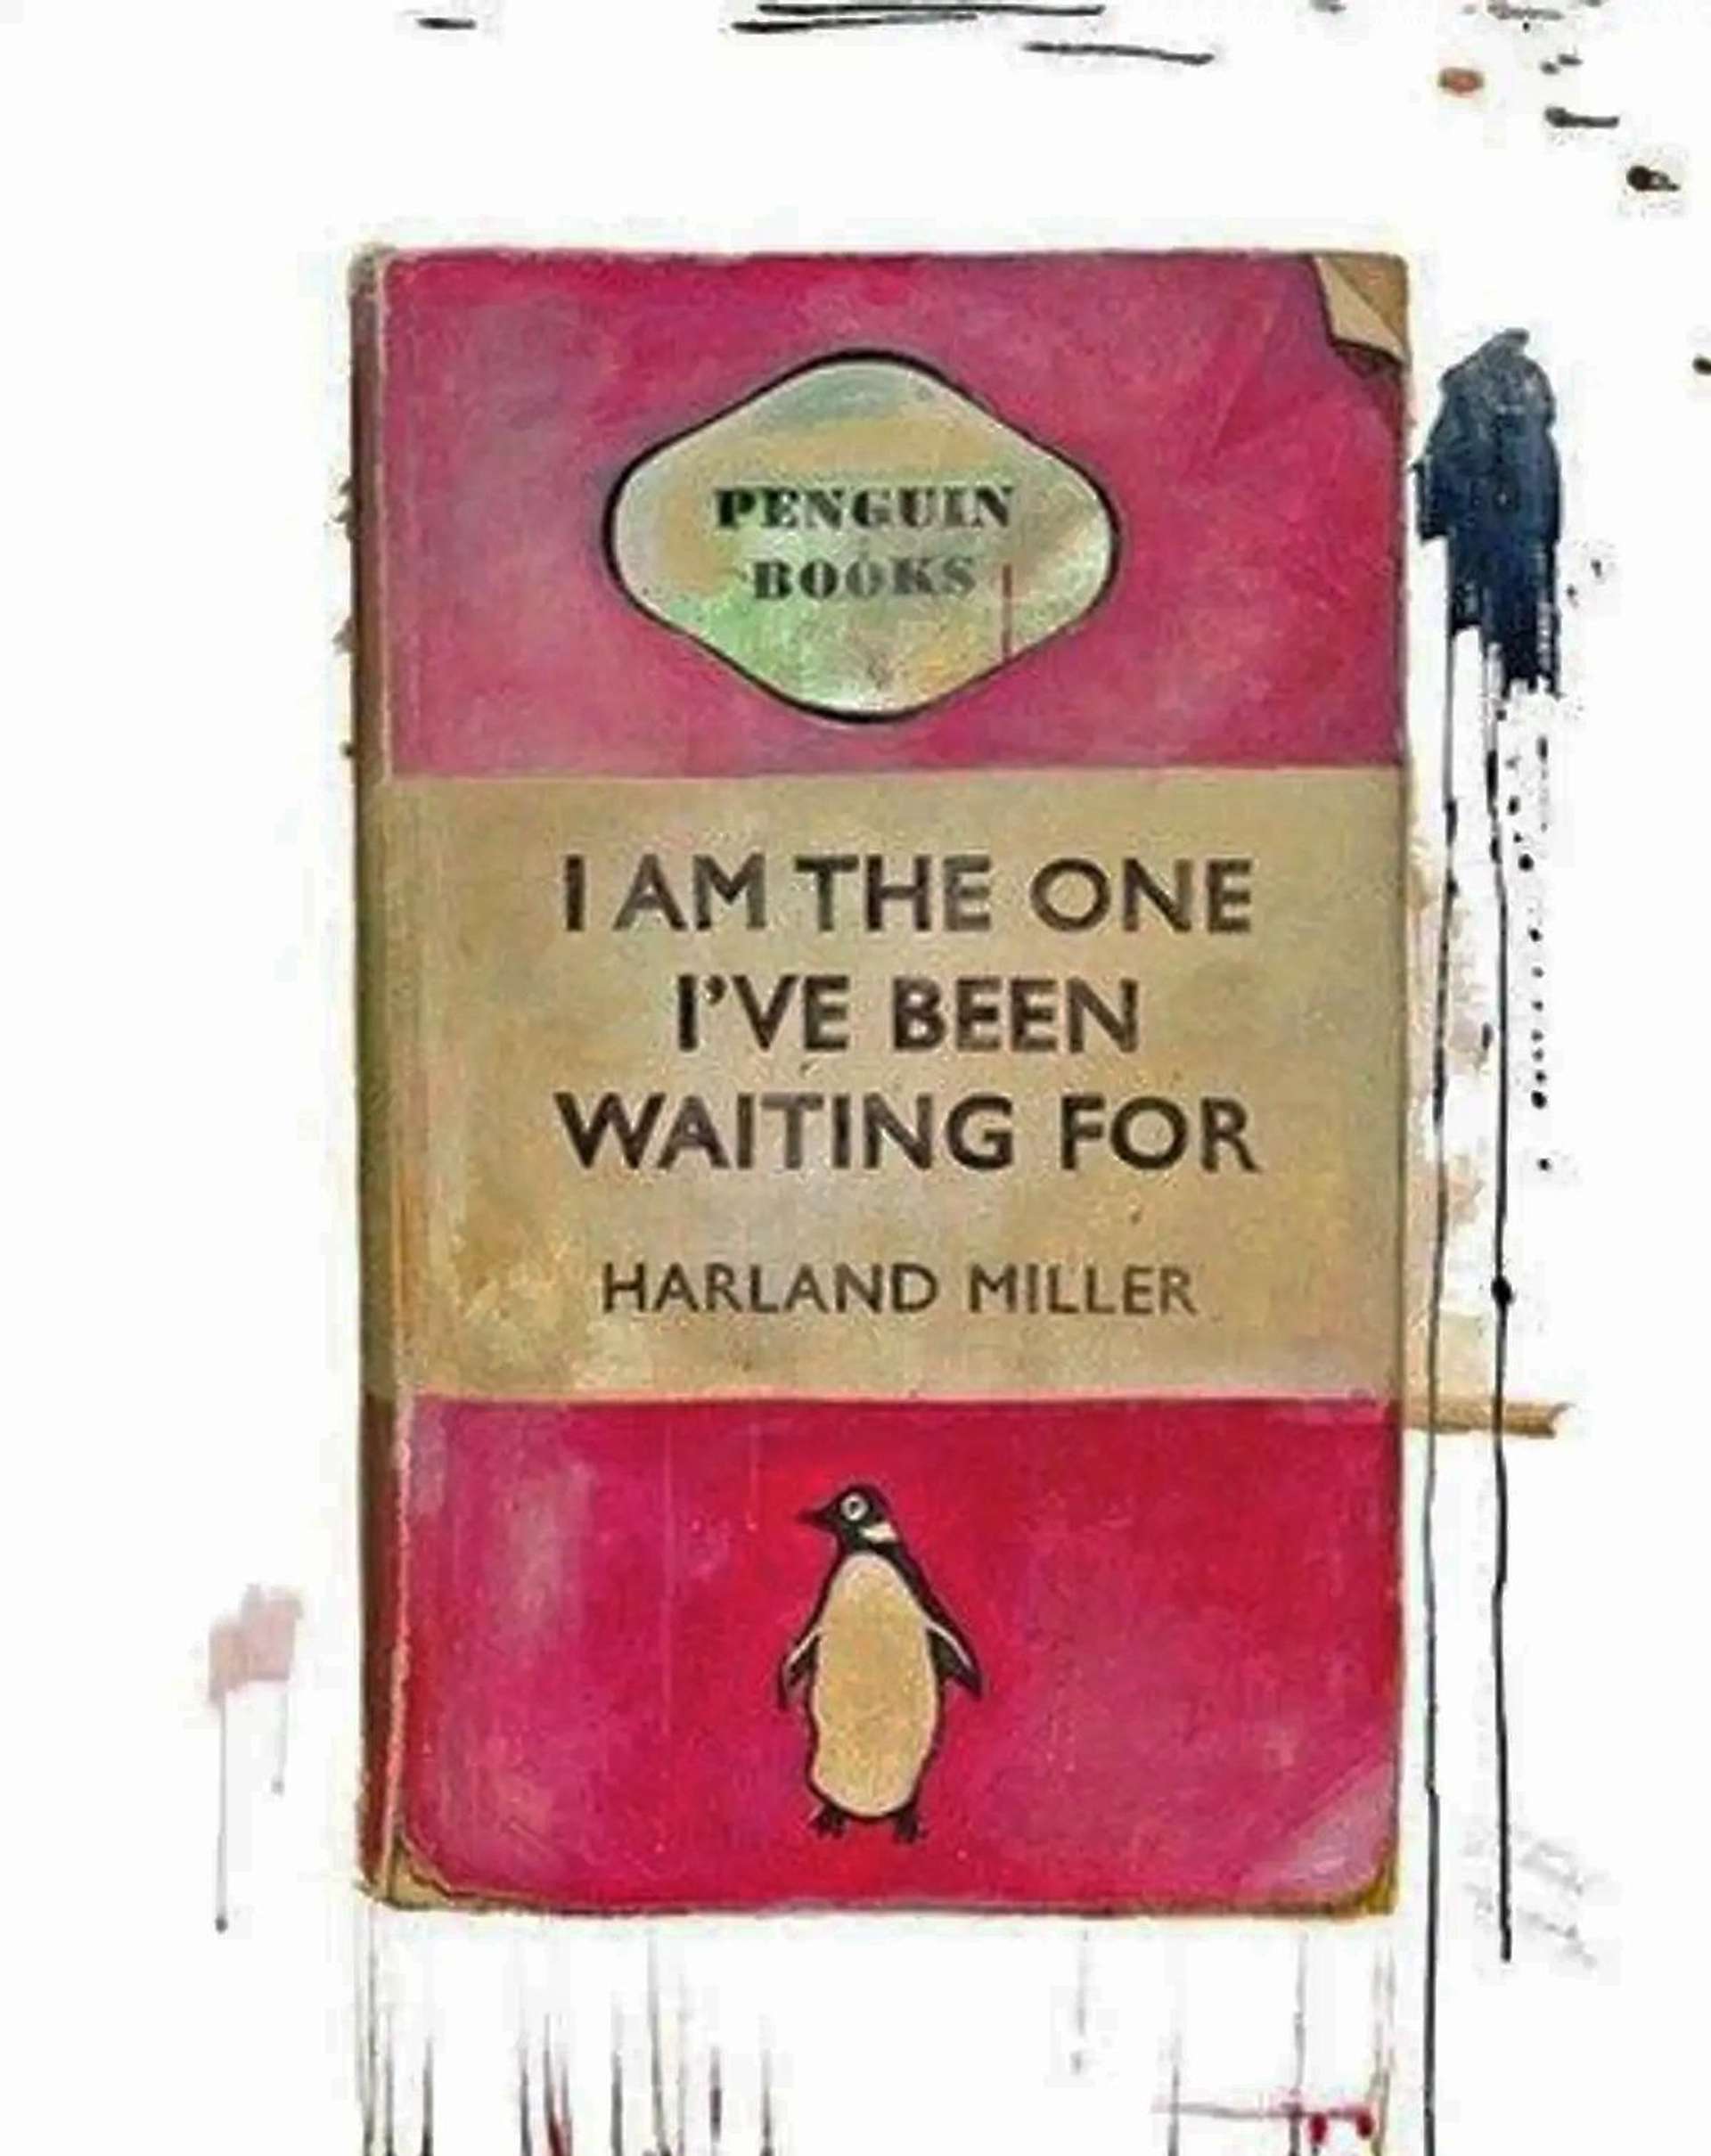 I Am The One I Have Been Waiting For by Harland Miller